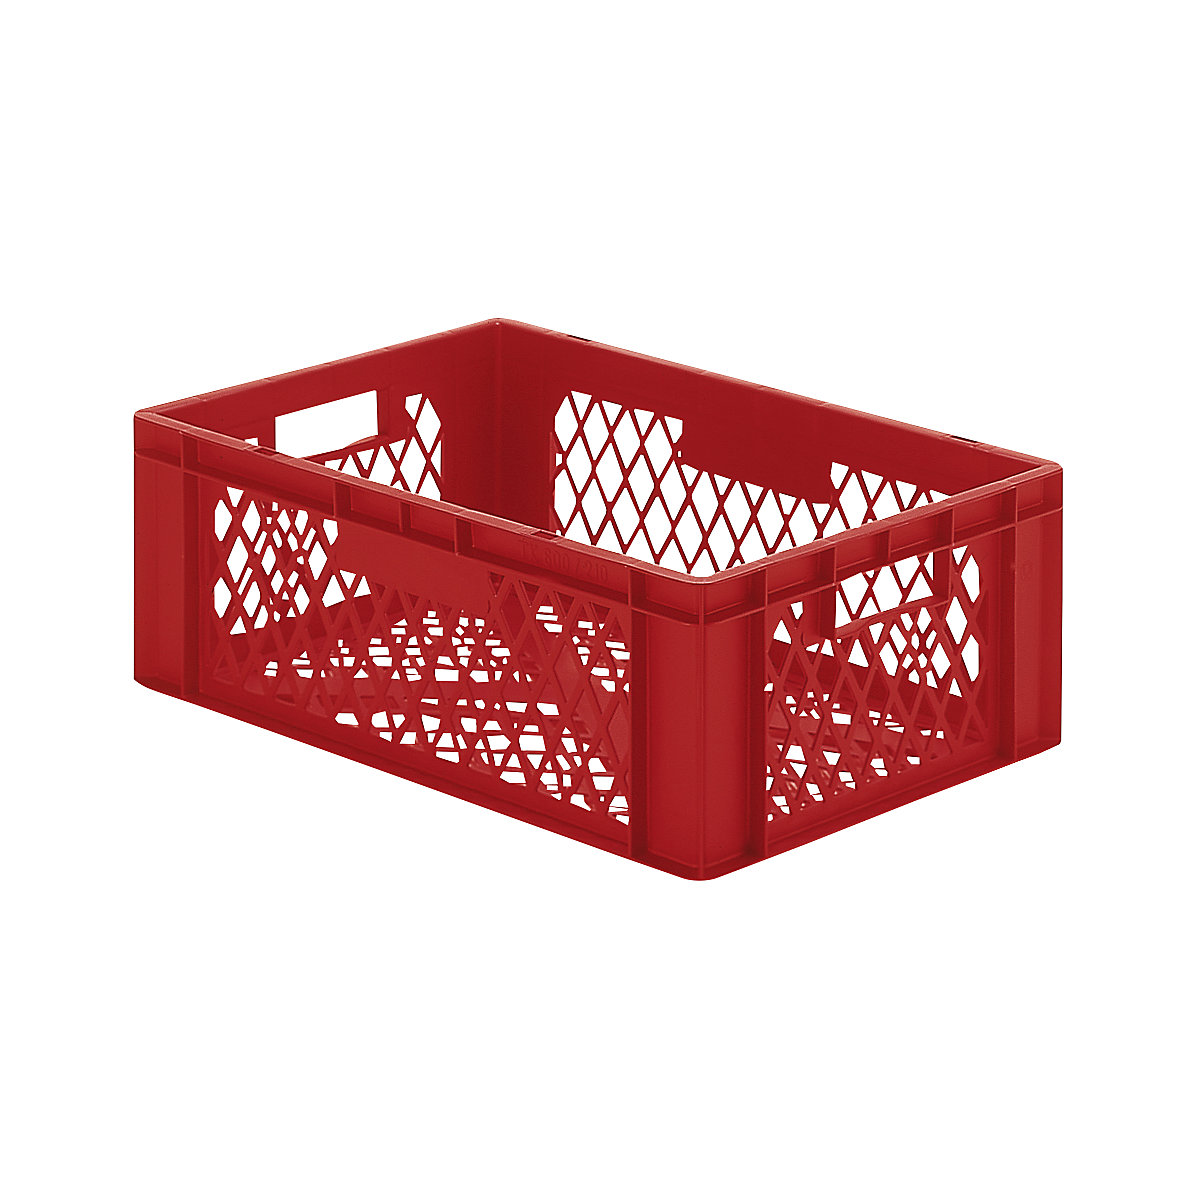 Euro stacking container, perforated walls and base, LxWxH 600 x 400 x 210 mm, red, pack of 5